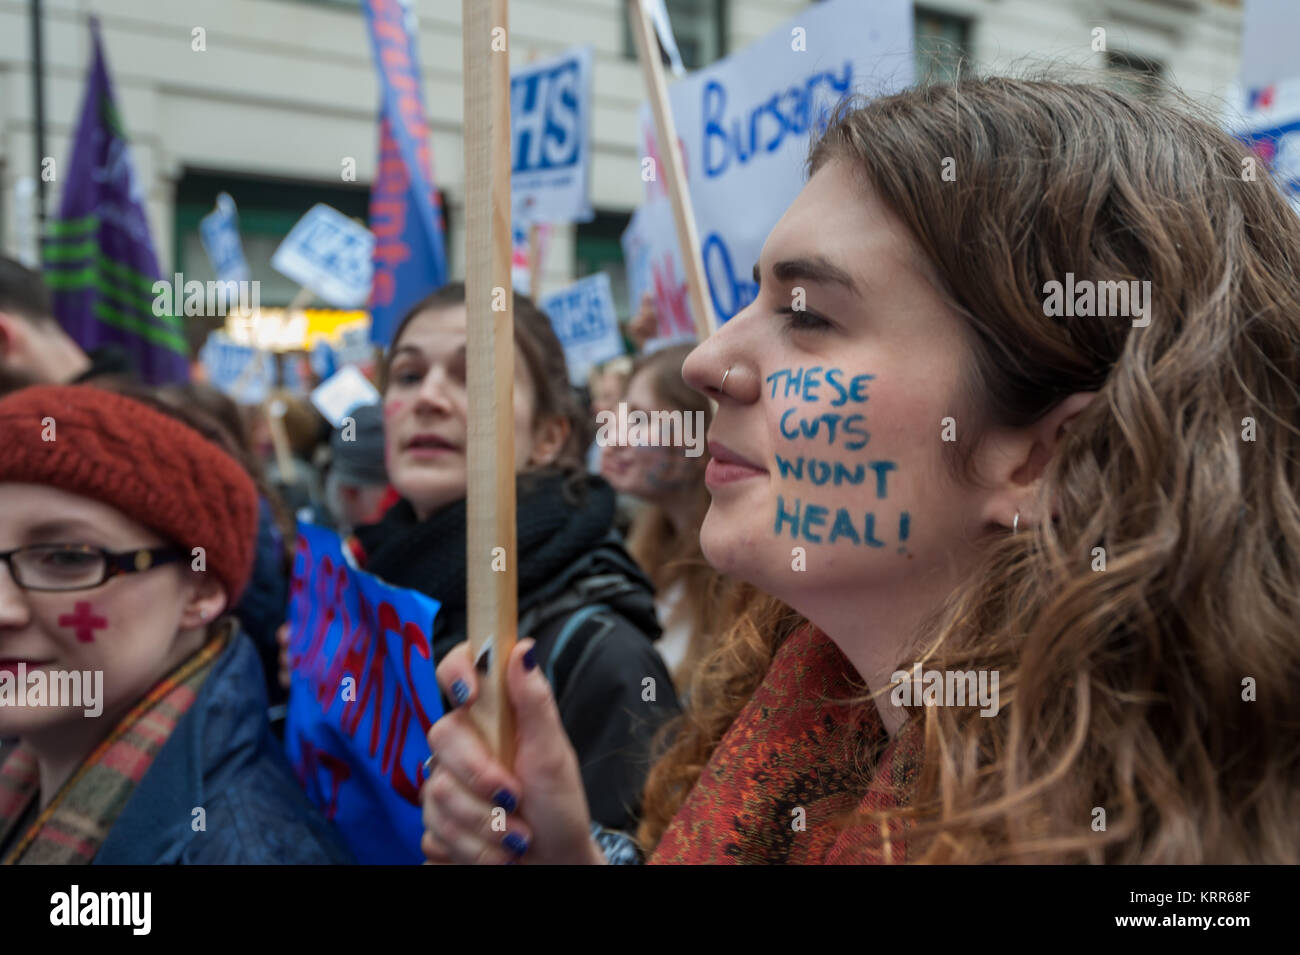 A woman in the crowd has 'These cuts wont Heal!' on her face before the march to save NHS Student Bursaries. Stock Photo